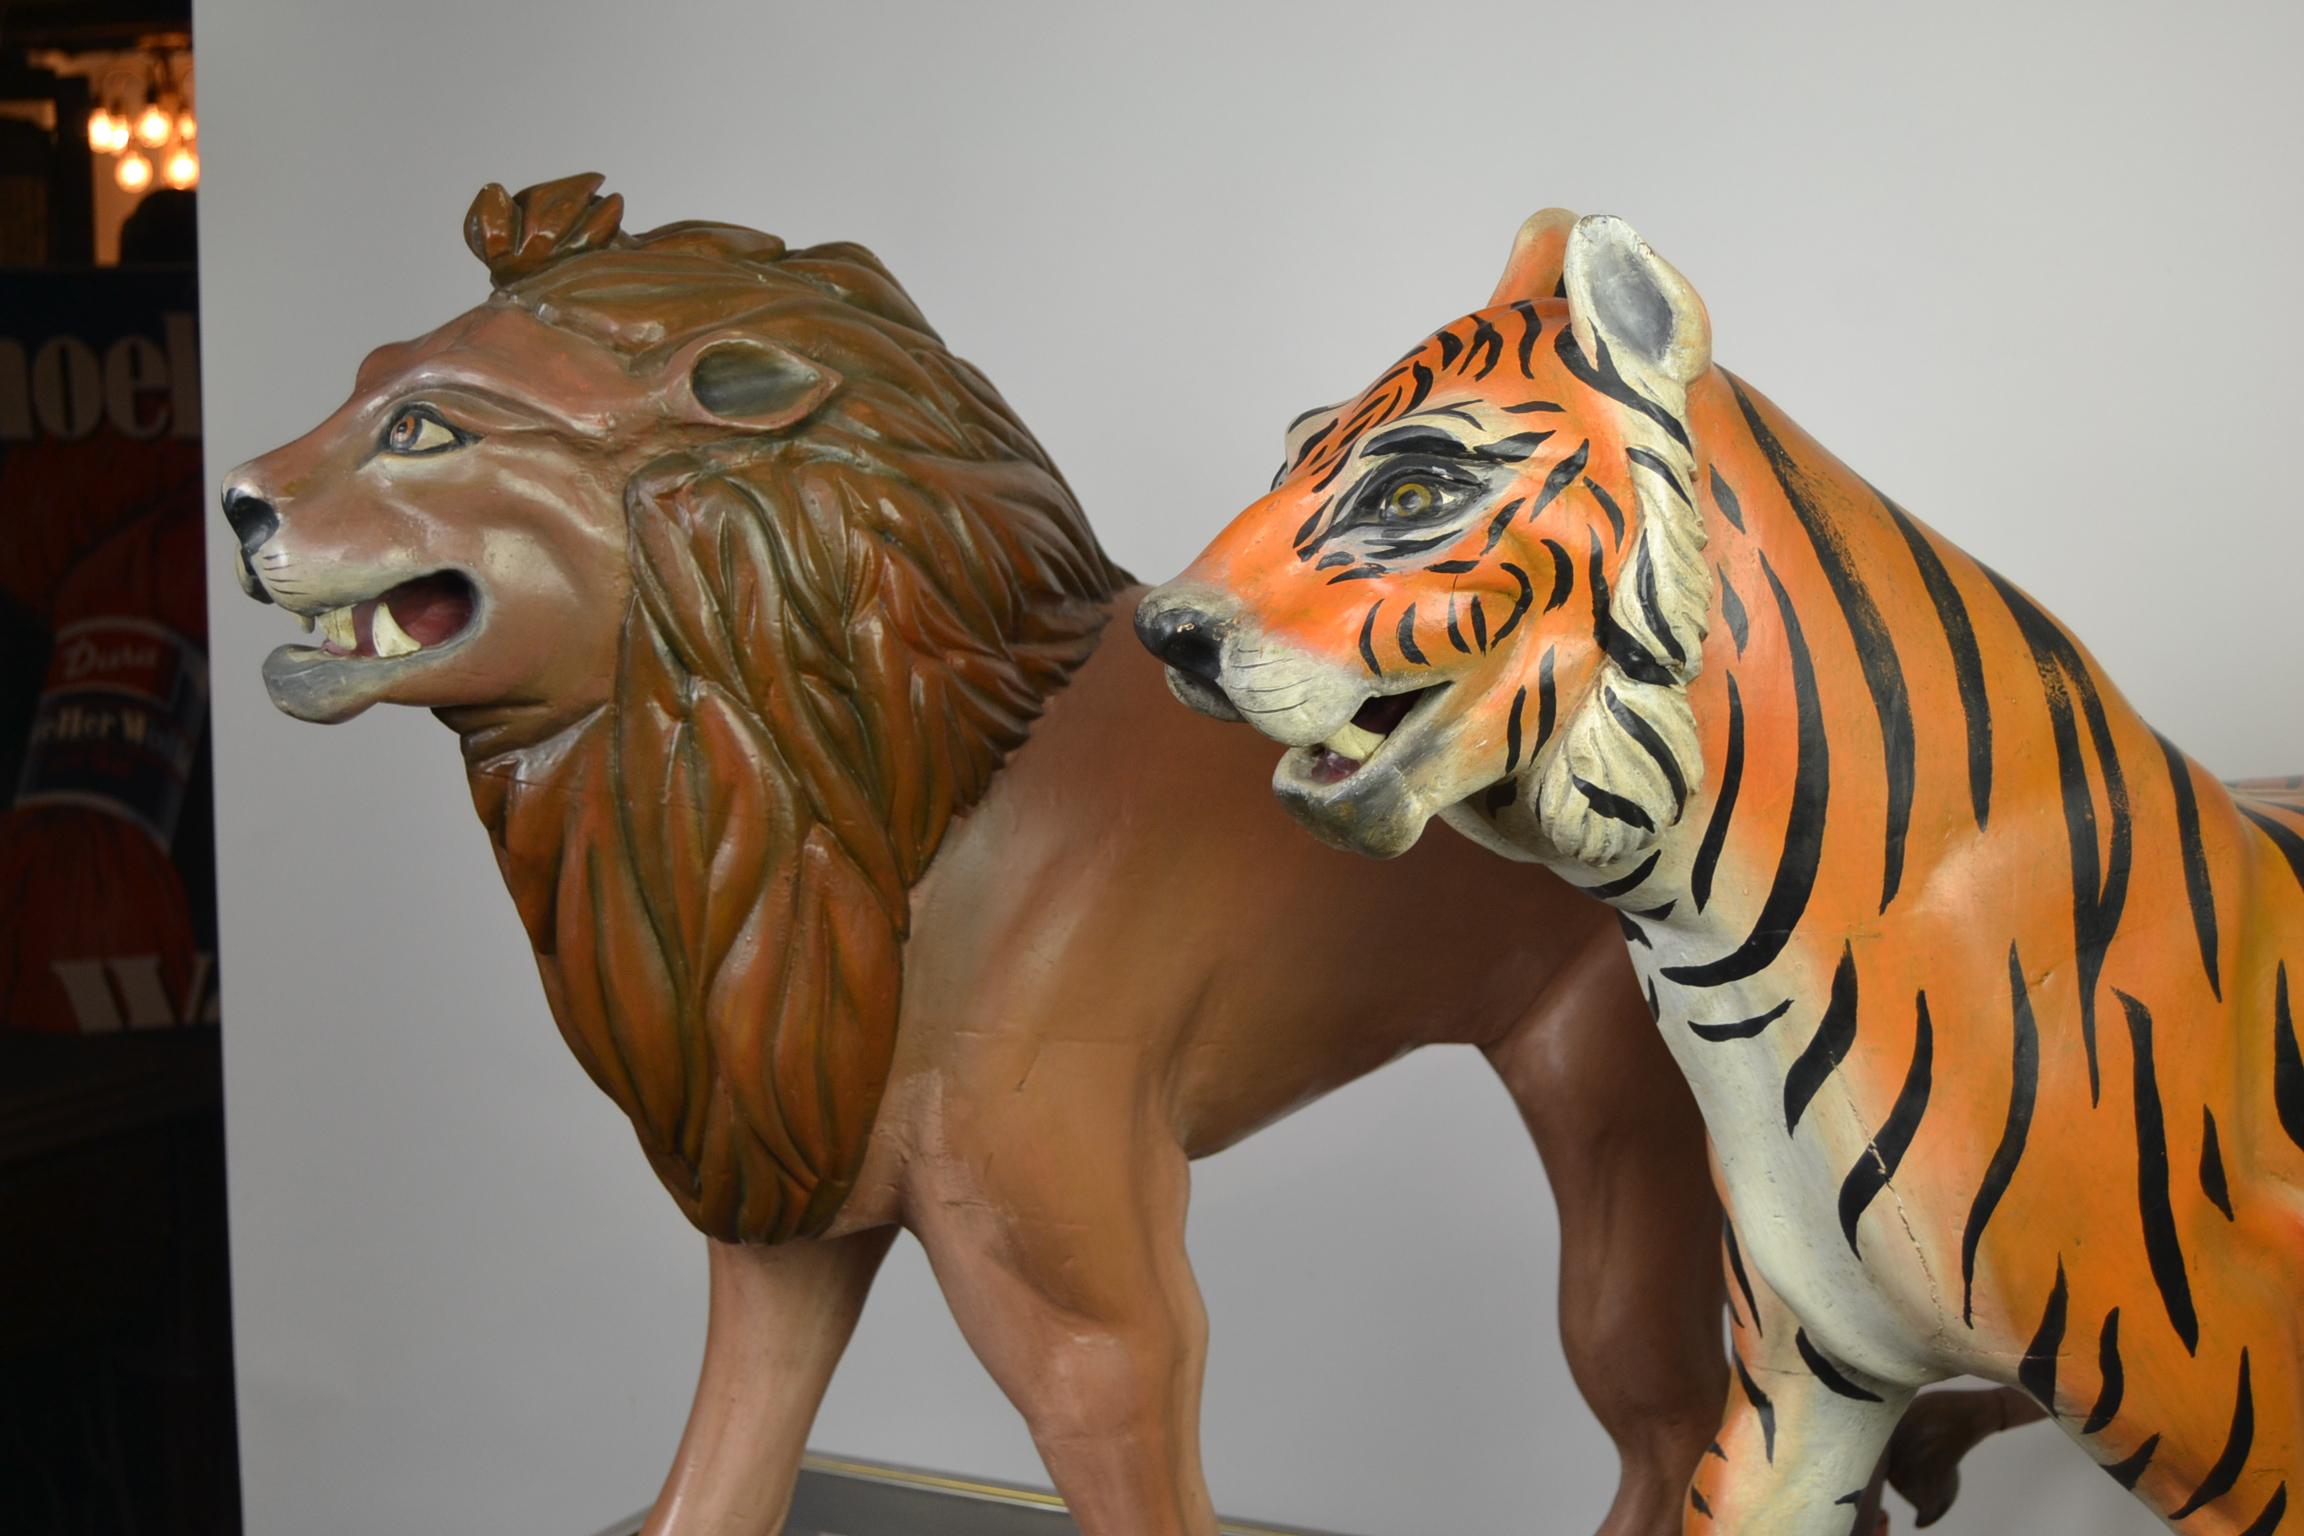 French Lion and Tiger Sculptures from Carousel, Wood, Europe, Mid-20th Century